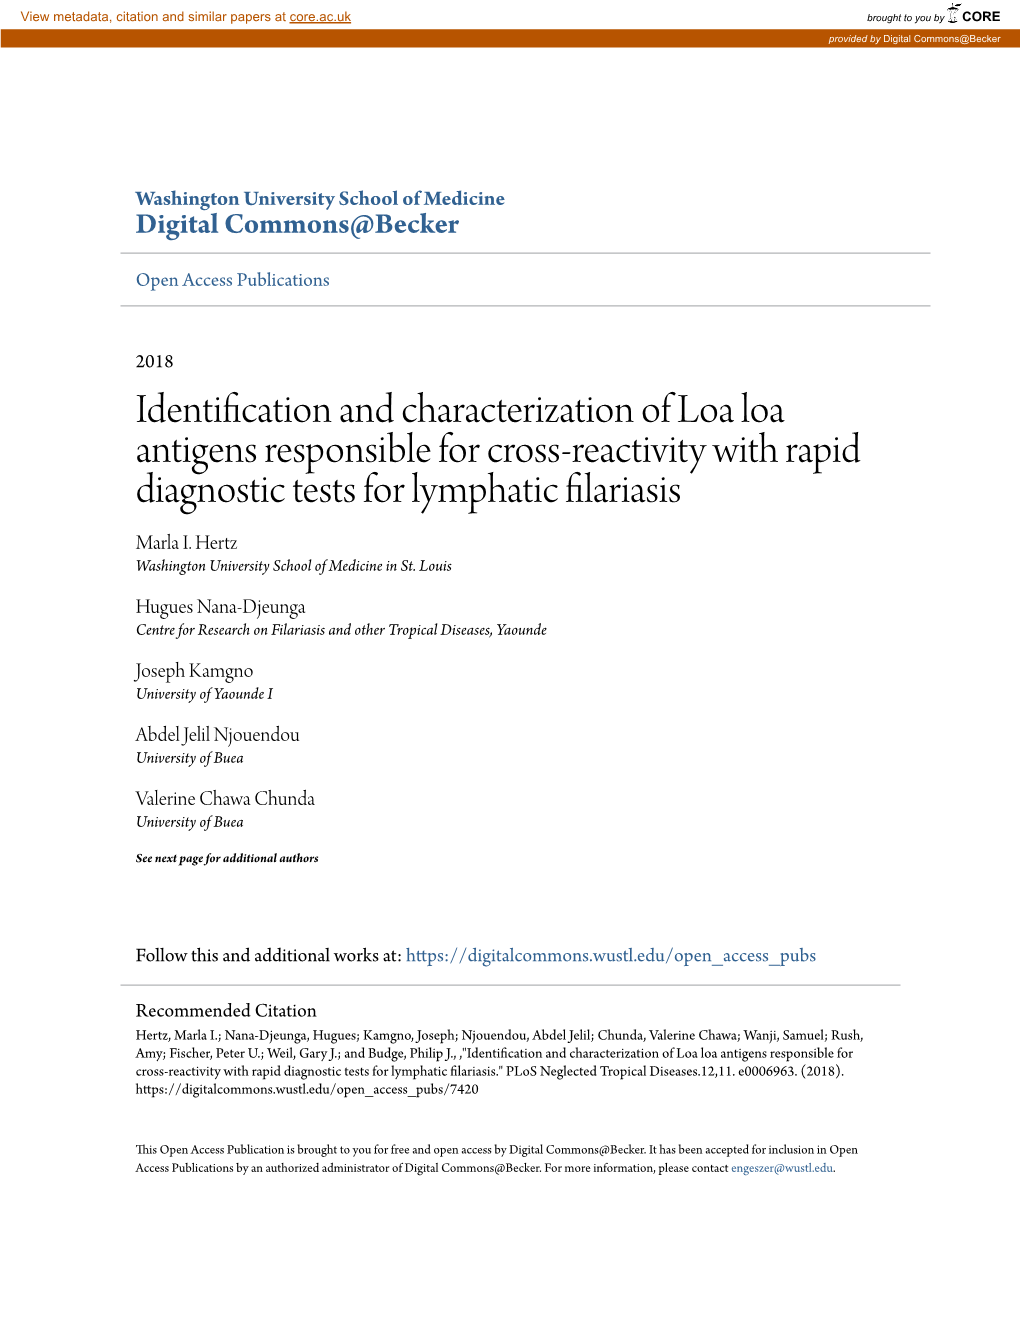 Loa Loa Antigens Responsible for Cross-Reactivity with Rapid Diagnostic Tests for Lymphatic Filariasis Marla I